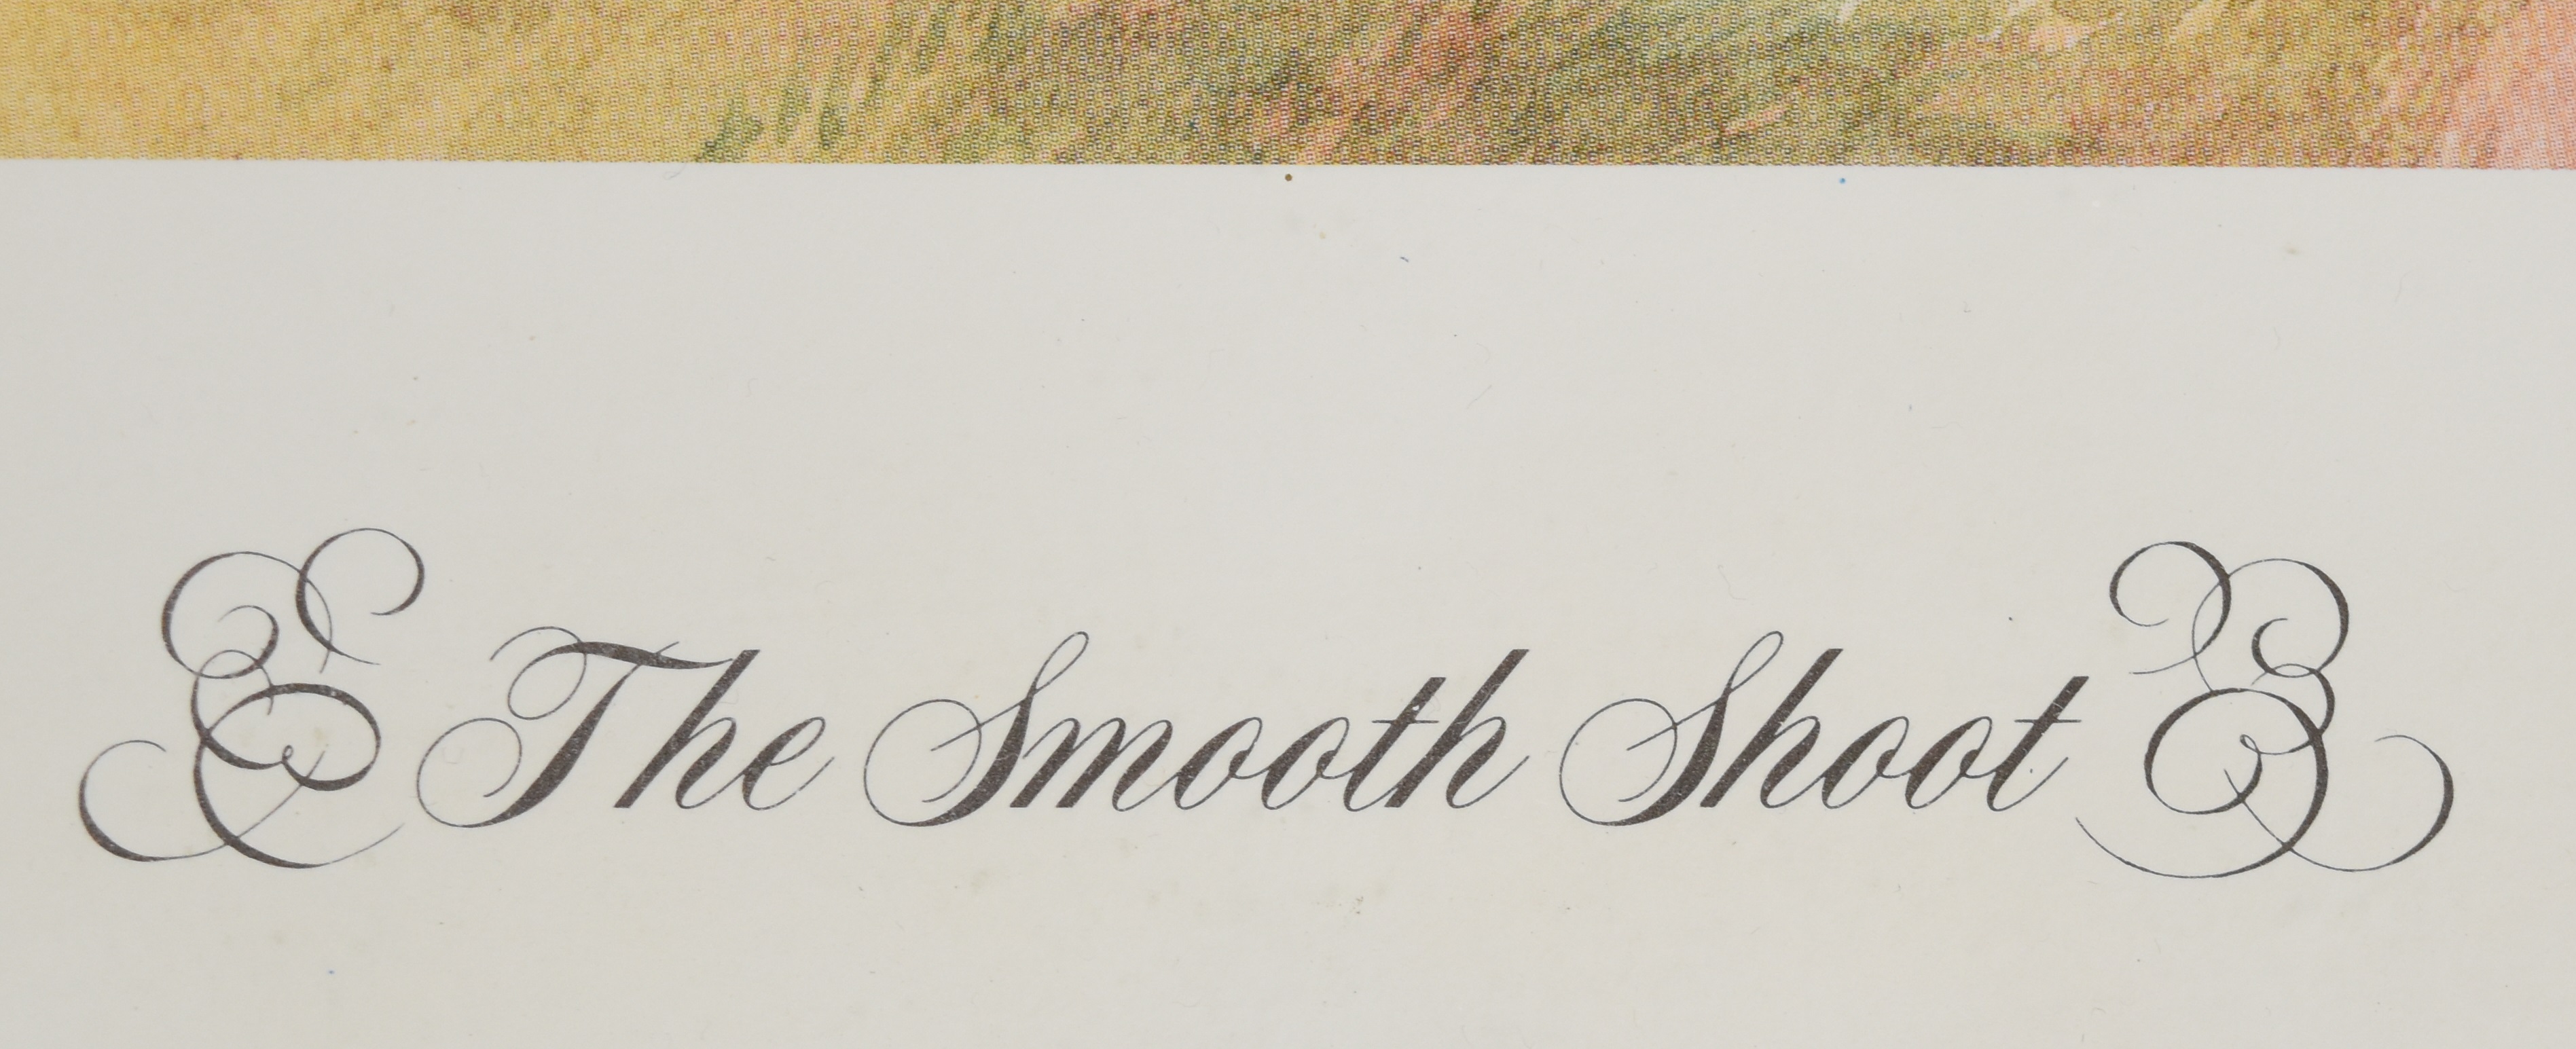 Two Norman Thelwell signed limited edition of 850 prints 'The Smooth Shoot' and 'The Royal Shoot', - Image 3 of 10